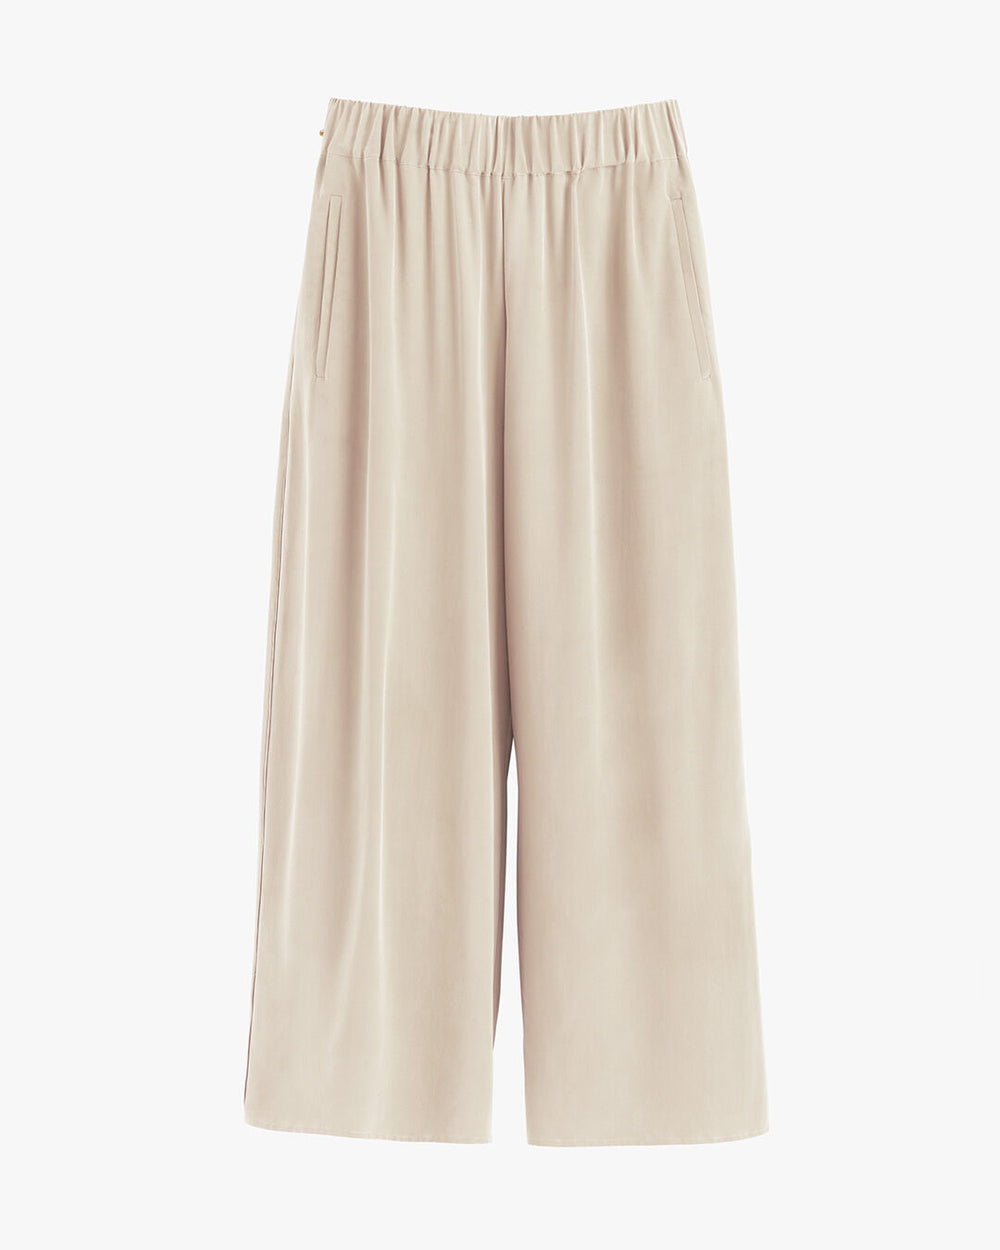 Pants with elastic waistband and pleated details.